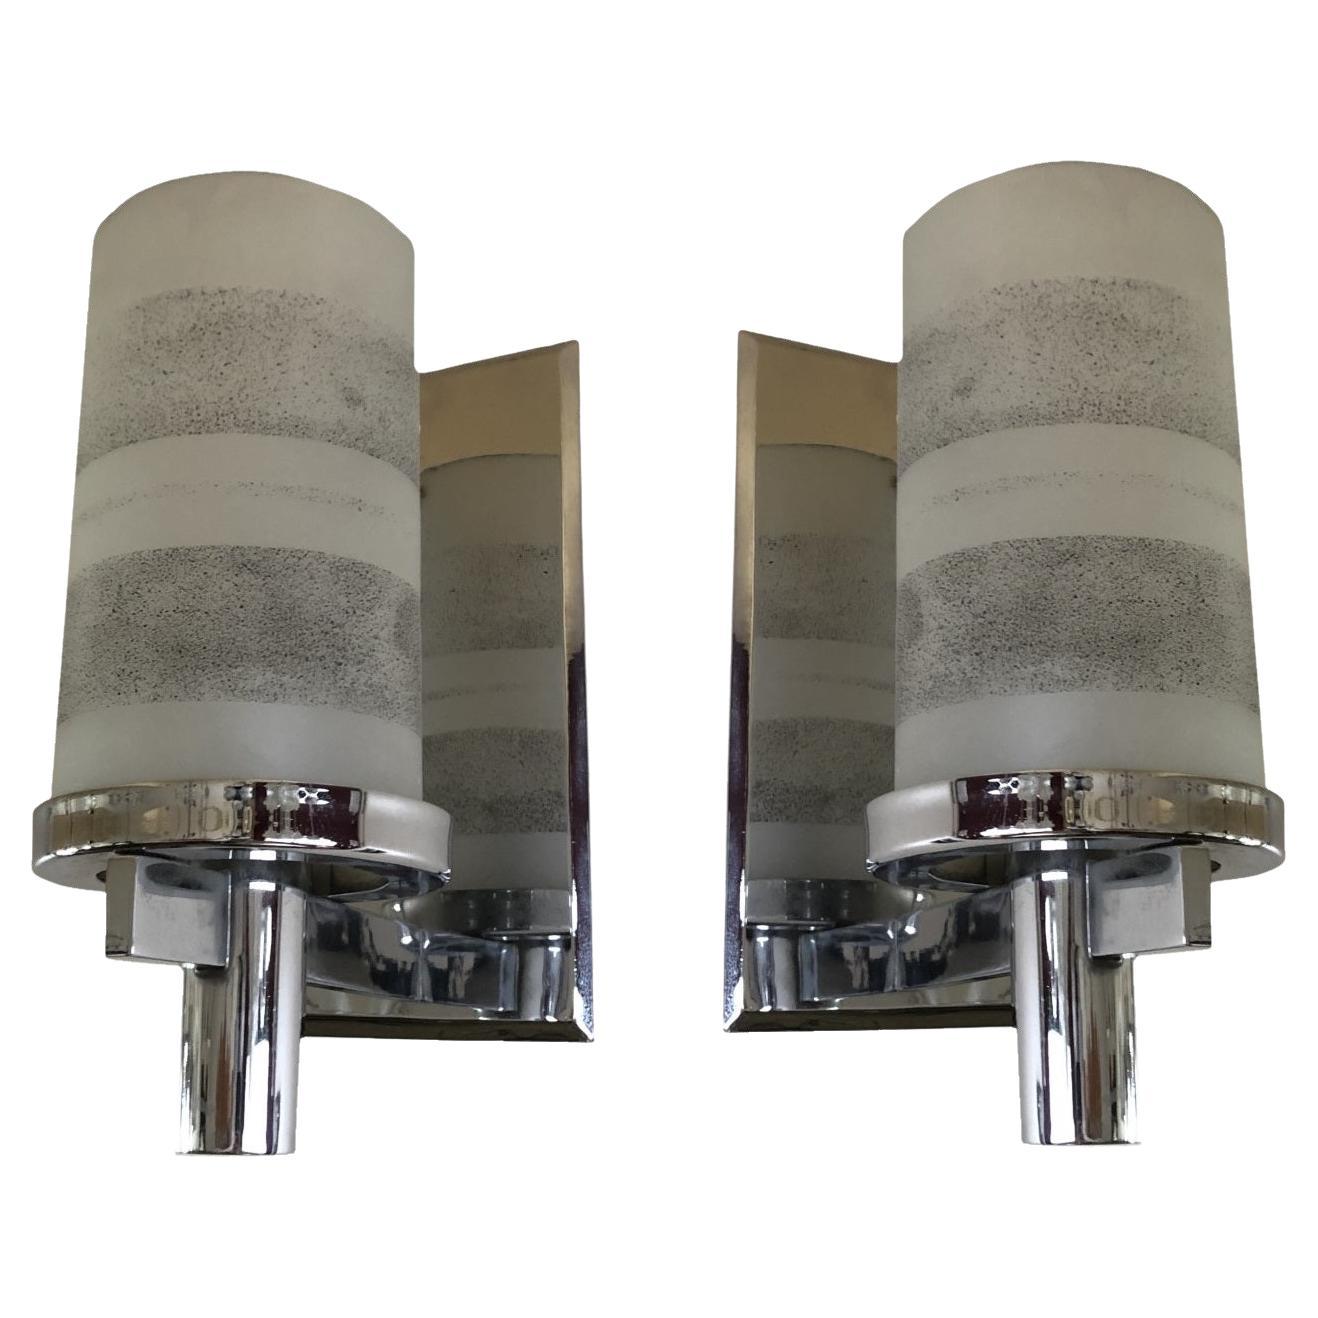 2 French Sconces in Chrome and Glass, Style, Art Deco, Year, 1930, German